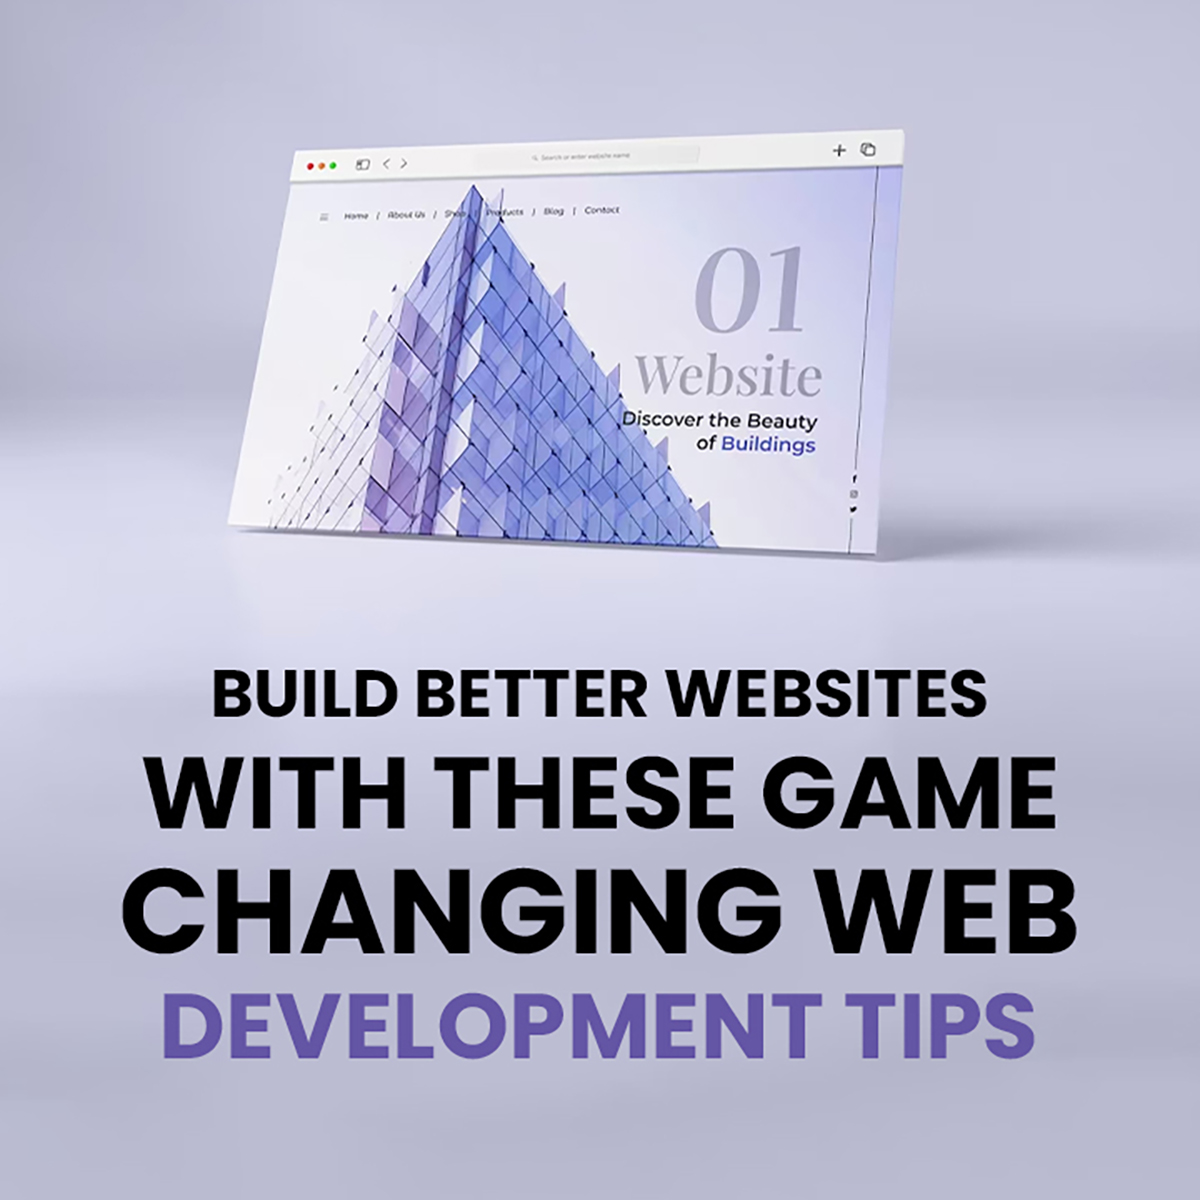 Build Better Websites with These Game-Changing Web